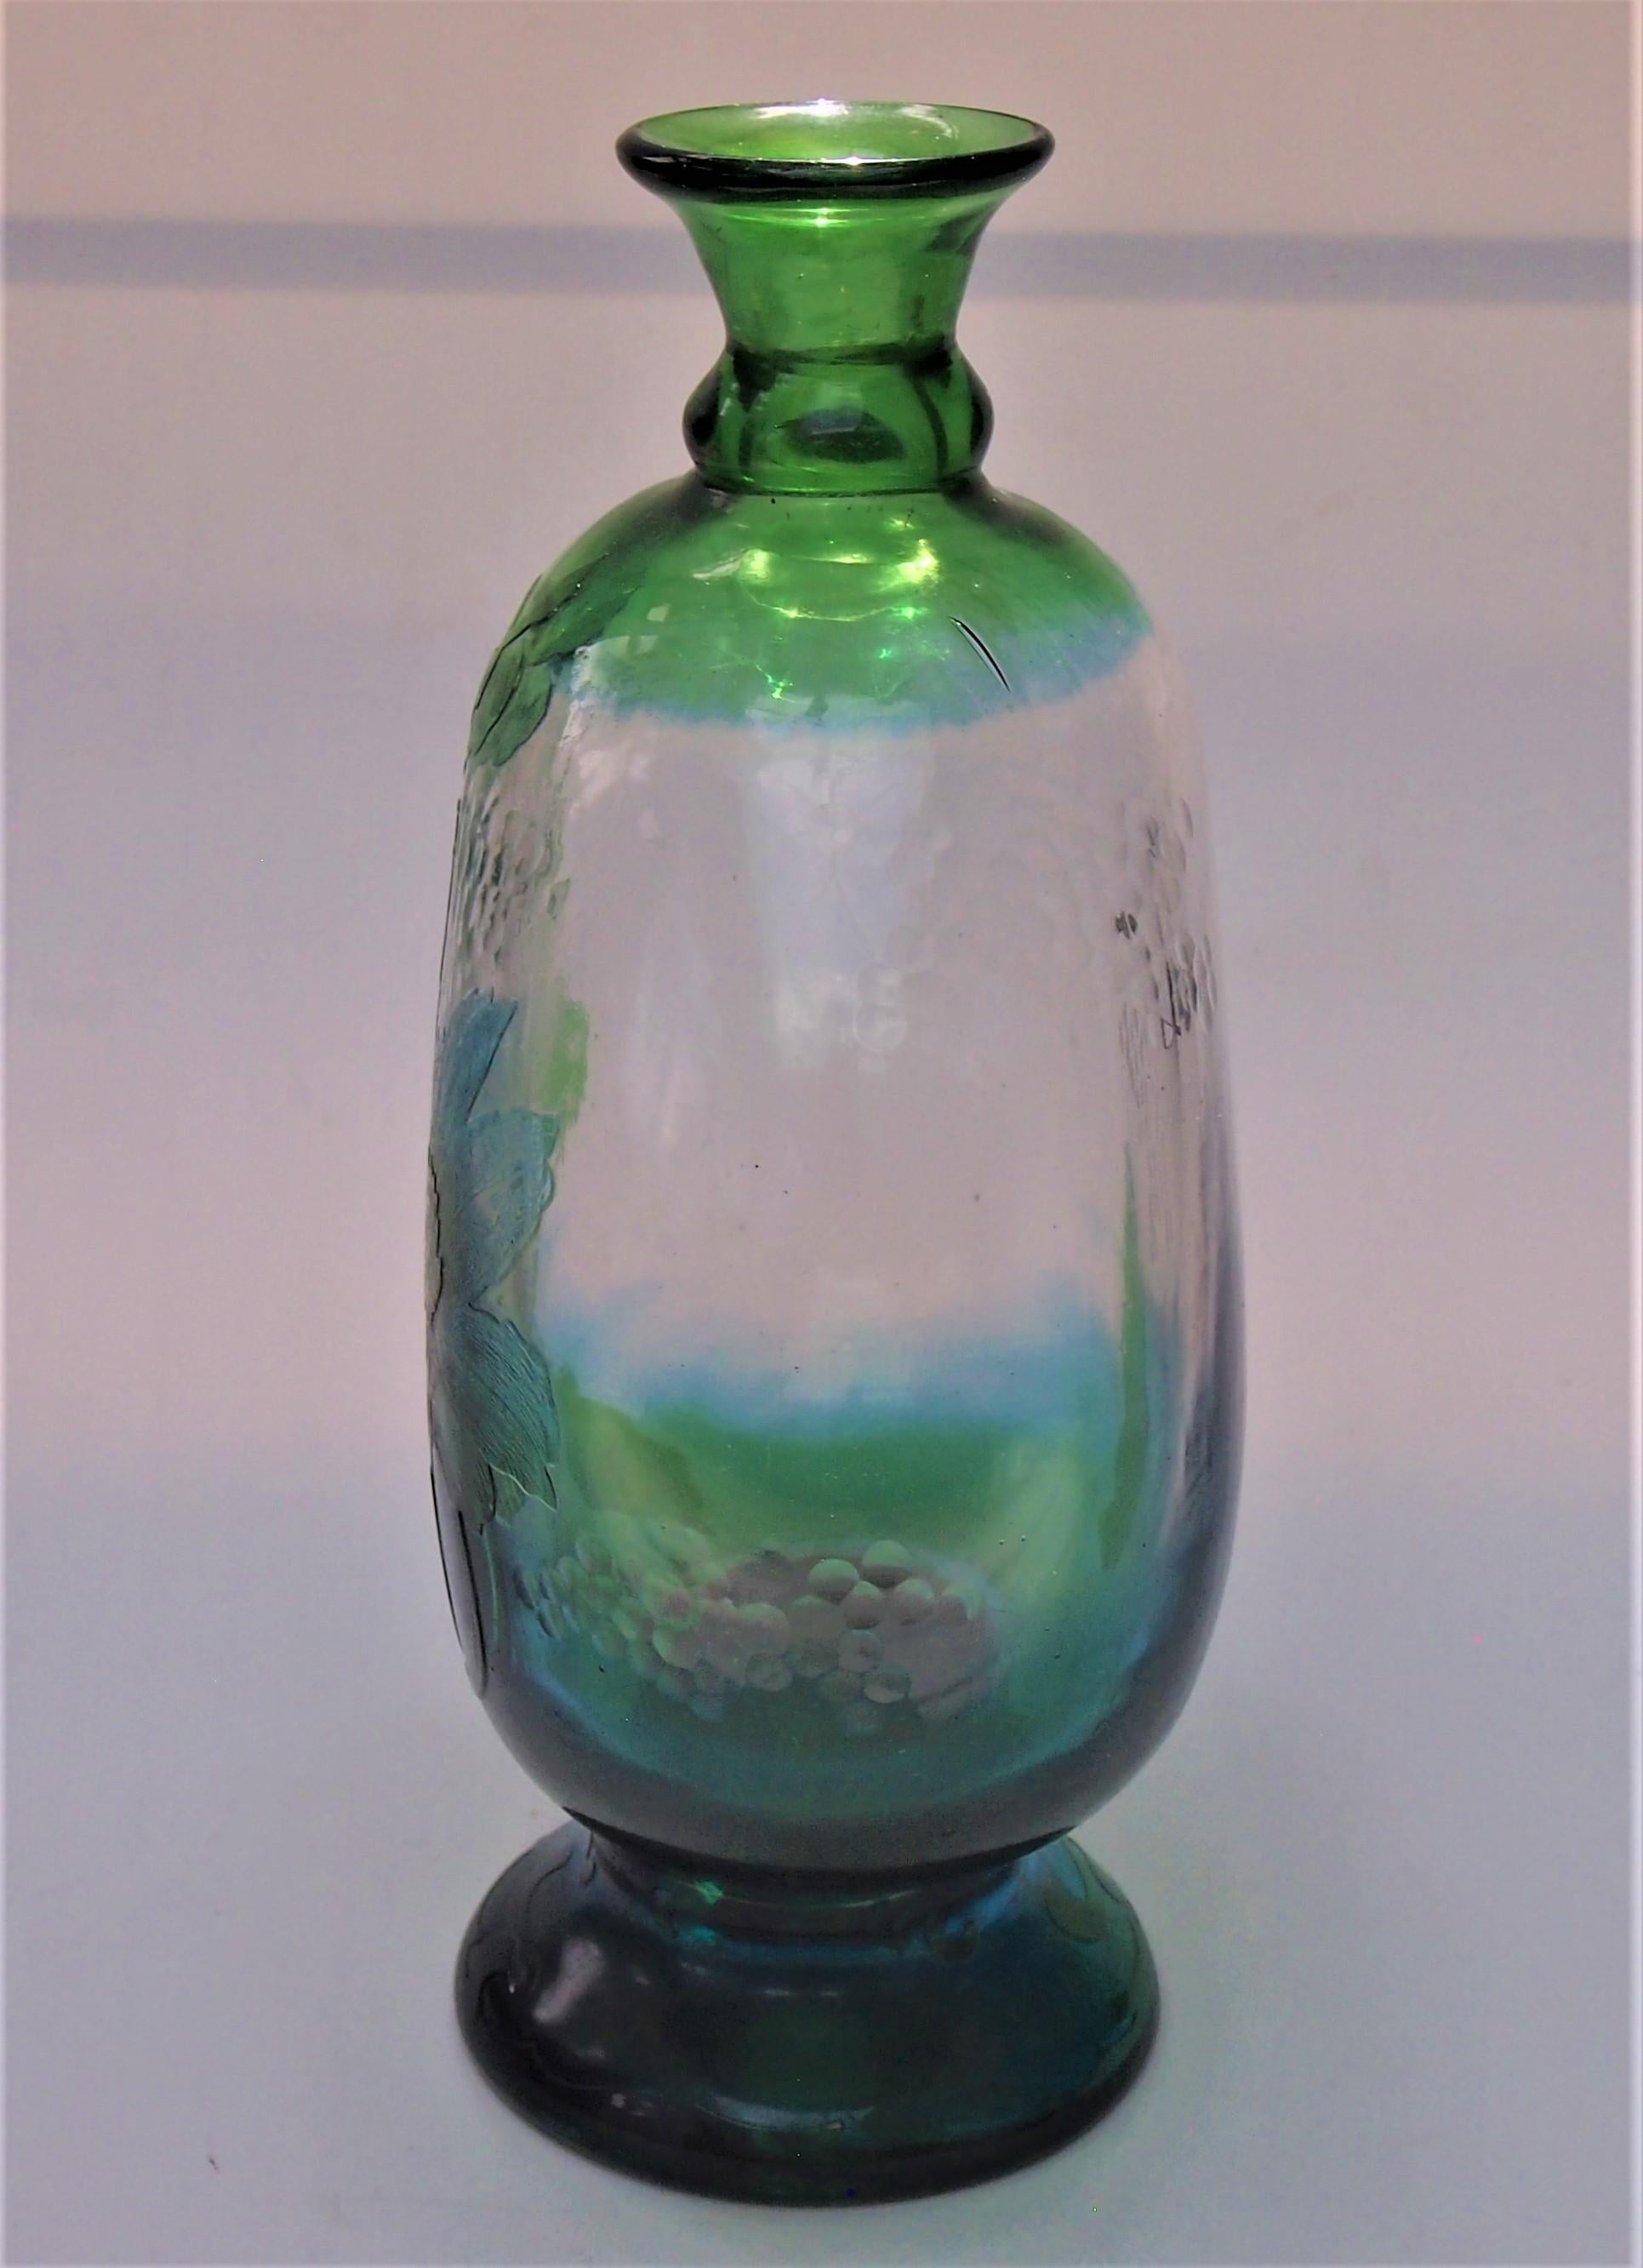 Fabulous large early Désiré Christian design Cameo and Martelé flask Vase - signed for both Christian and  Miesenthal (see last image) c 1890, in blue and green over clear, selectively Martelé (a technique making the glass look like it has a series